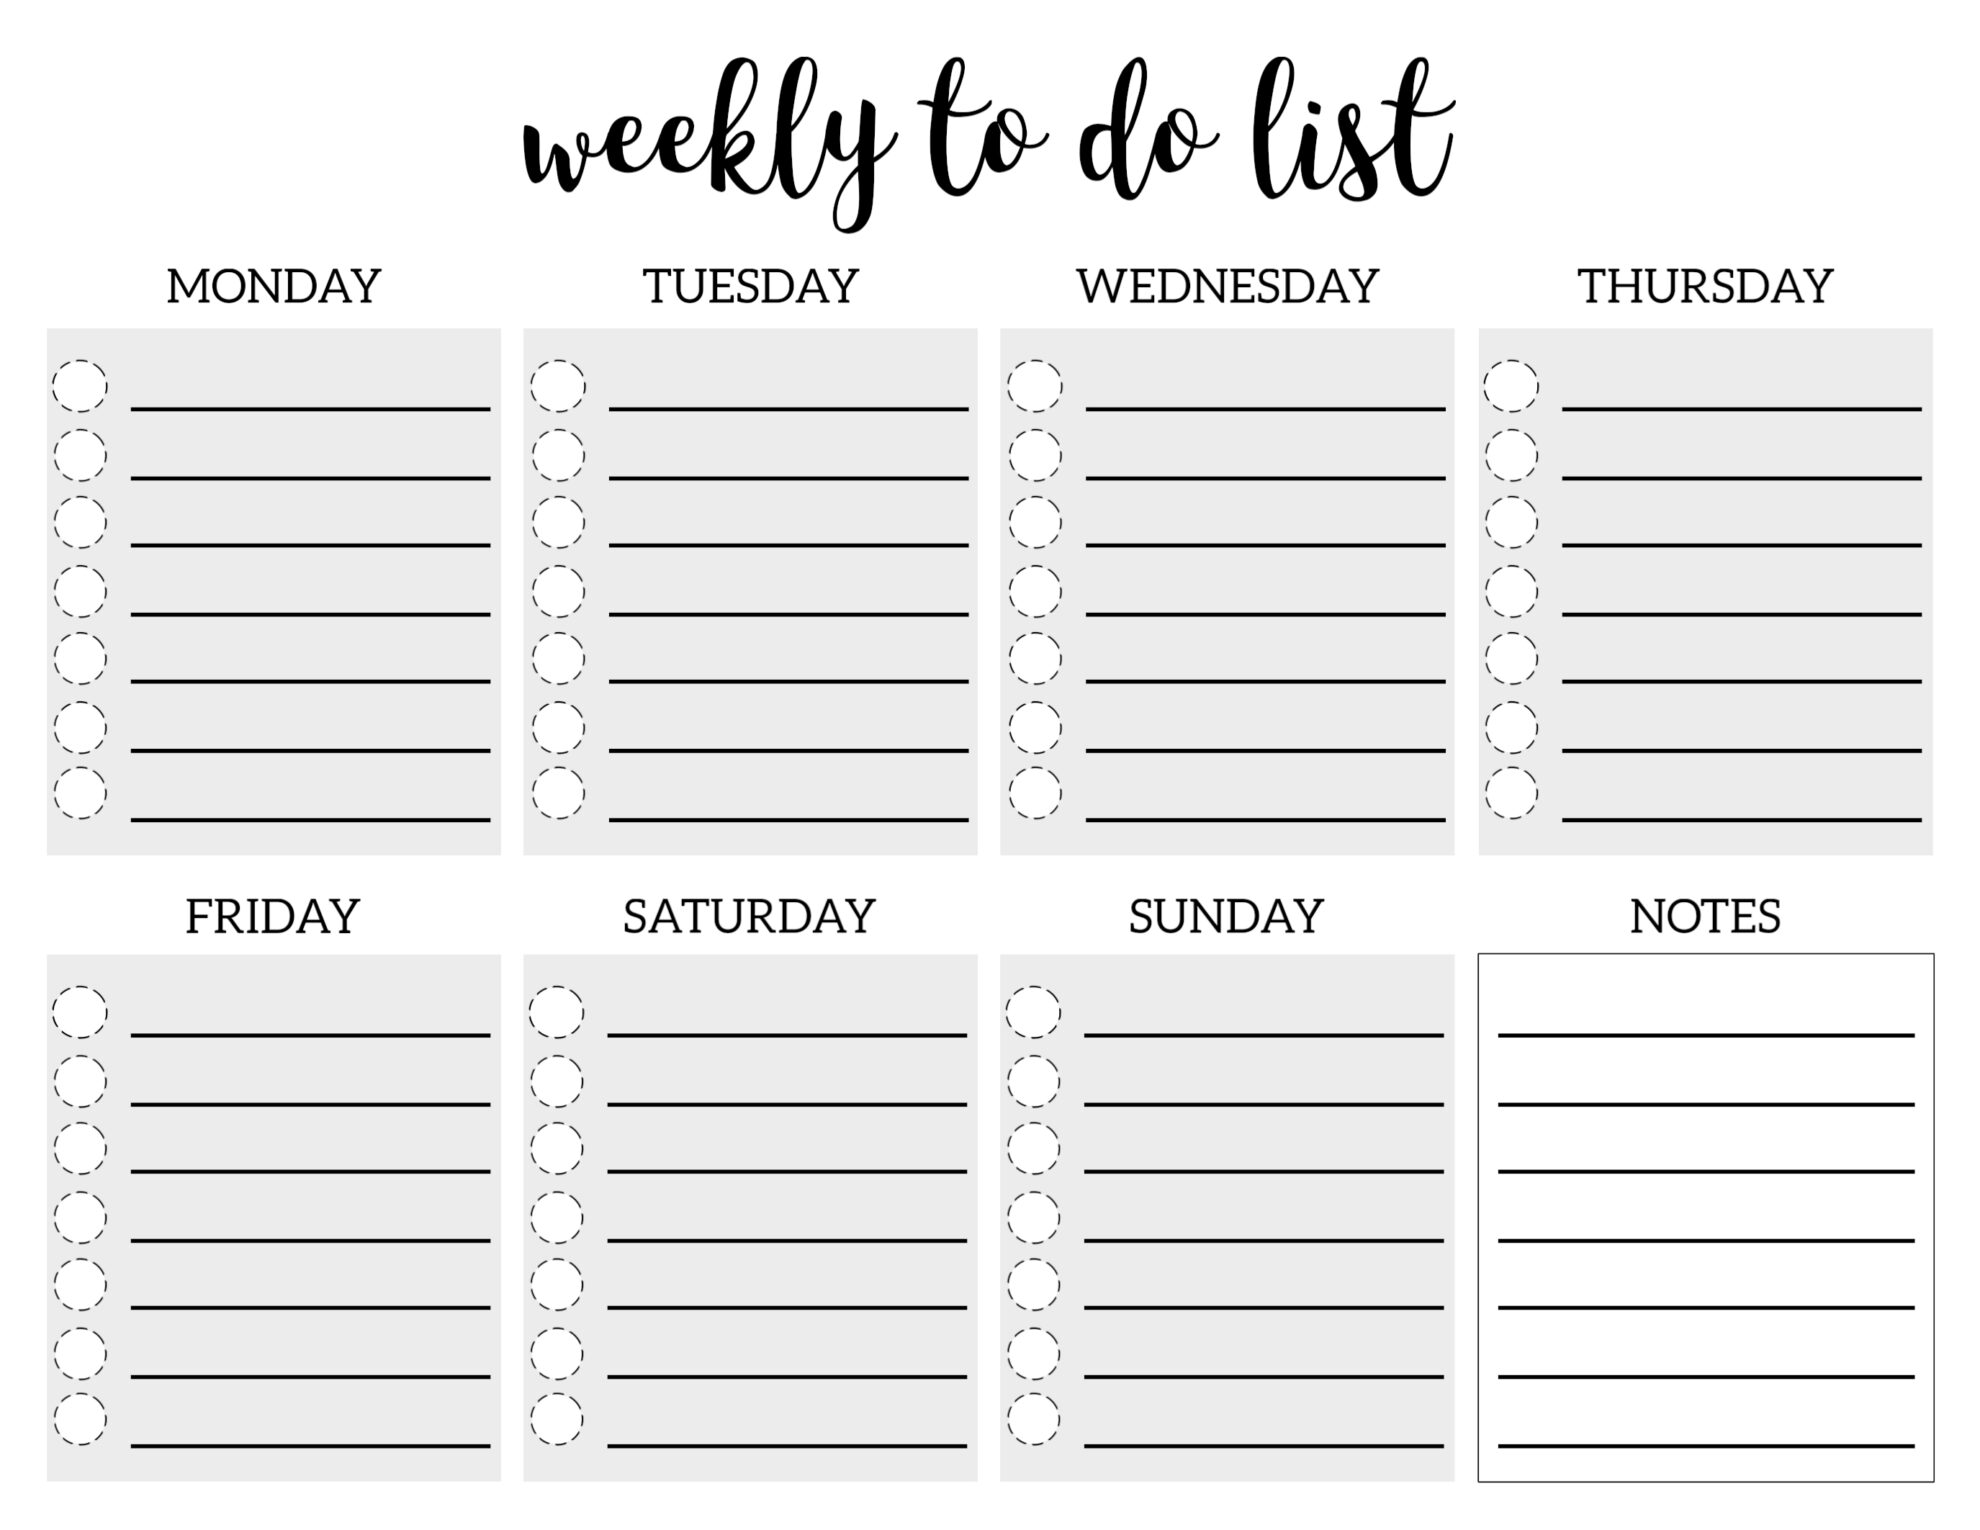 daily schedule checklist template printable free